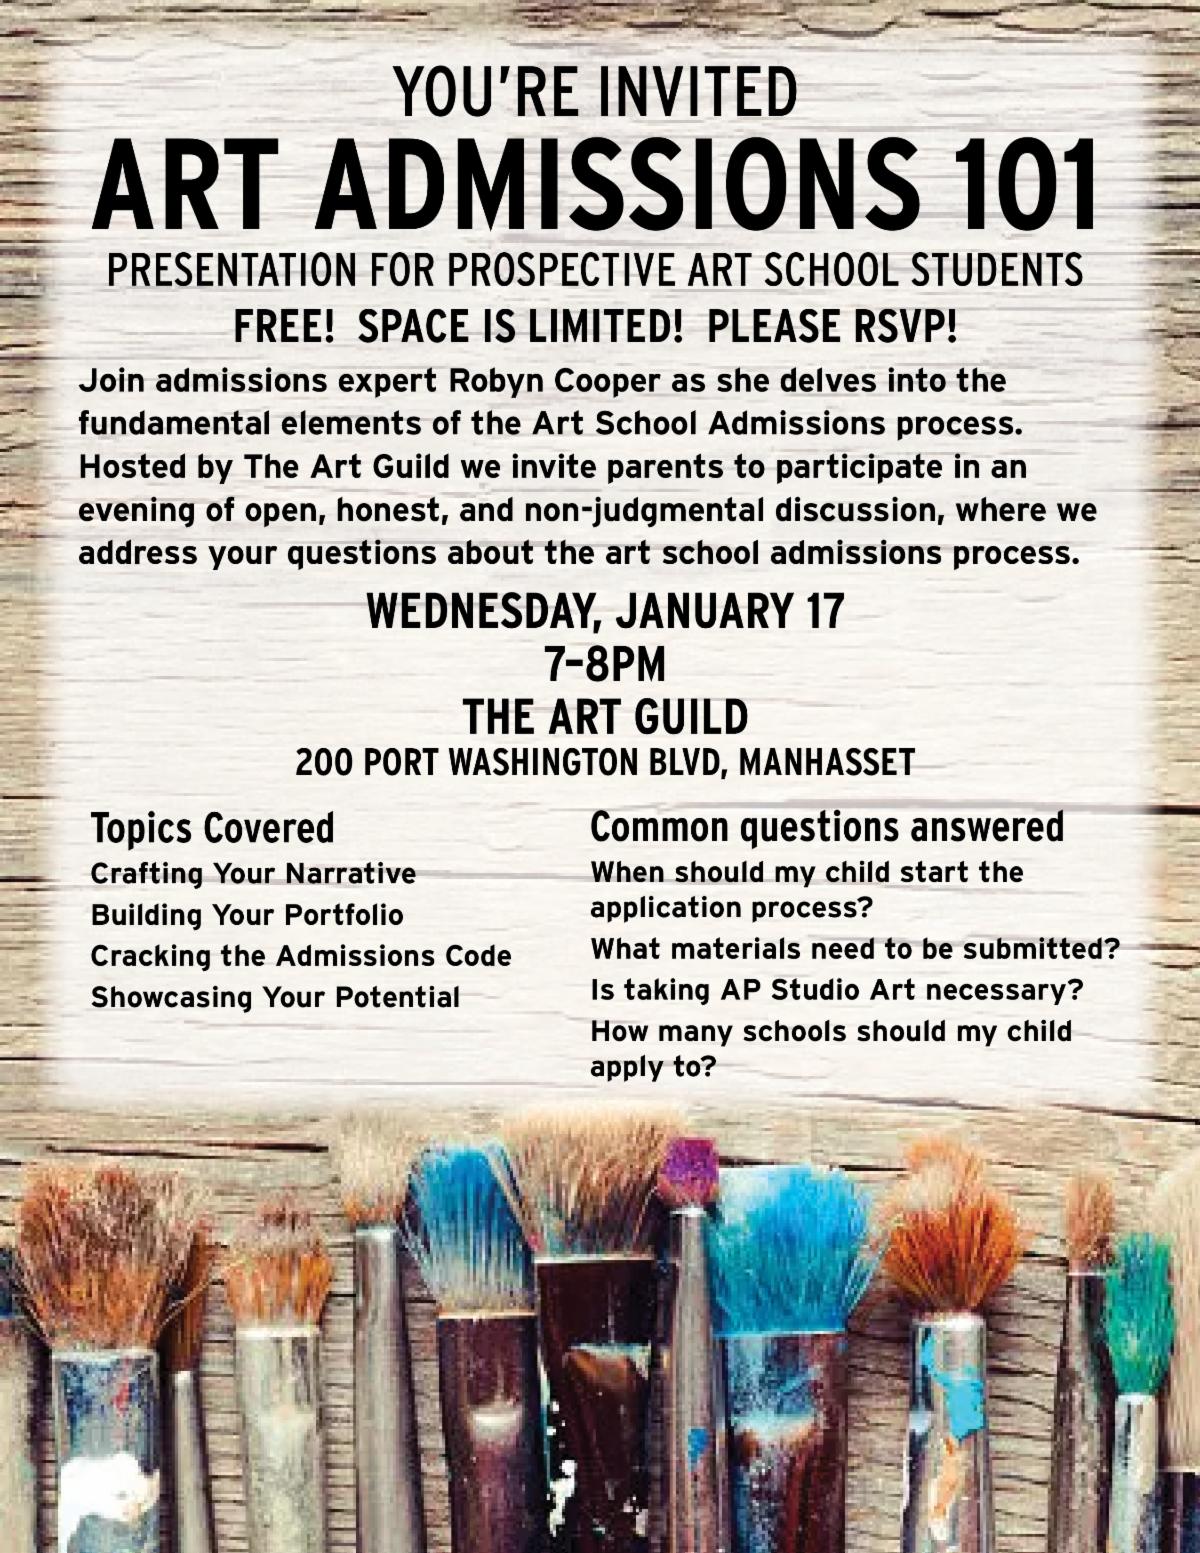 Adult & kids workshops in painting, urban sketch, watercolor, acrylic pour, printmaking, yarn, photography, oils, iphone